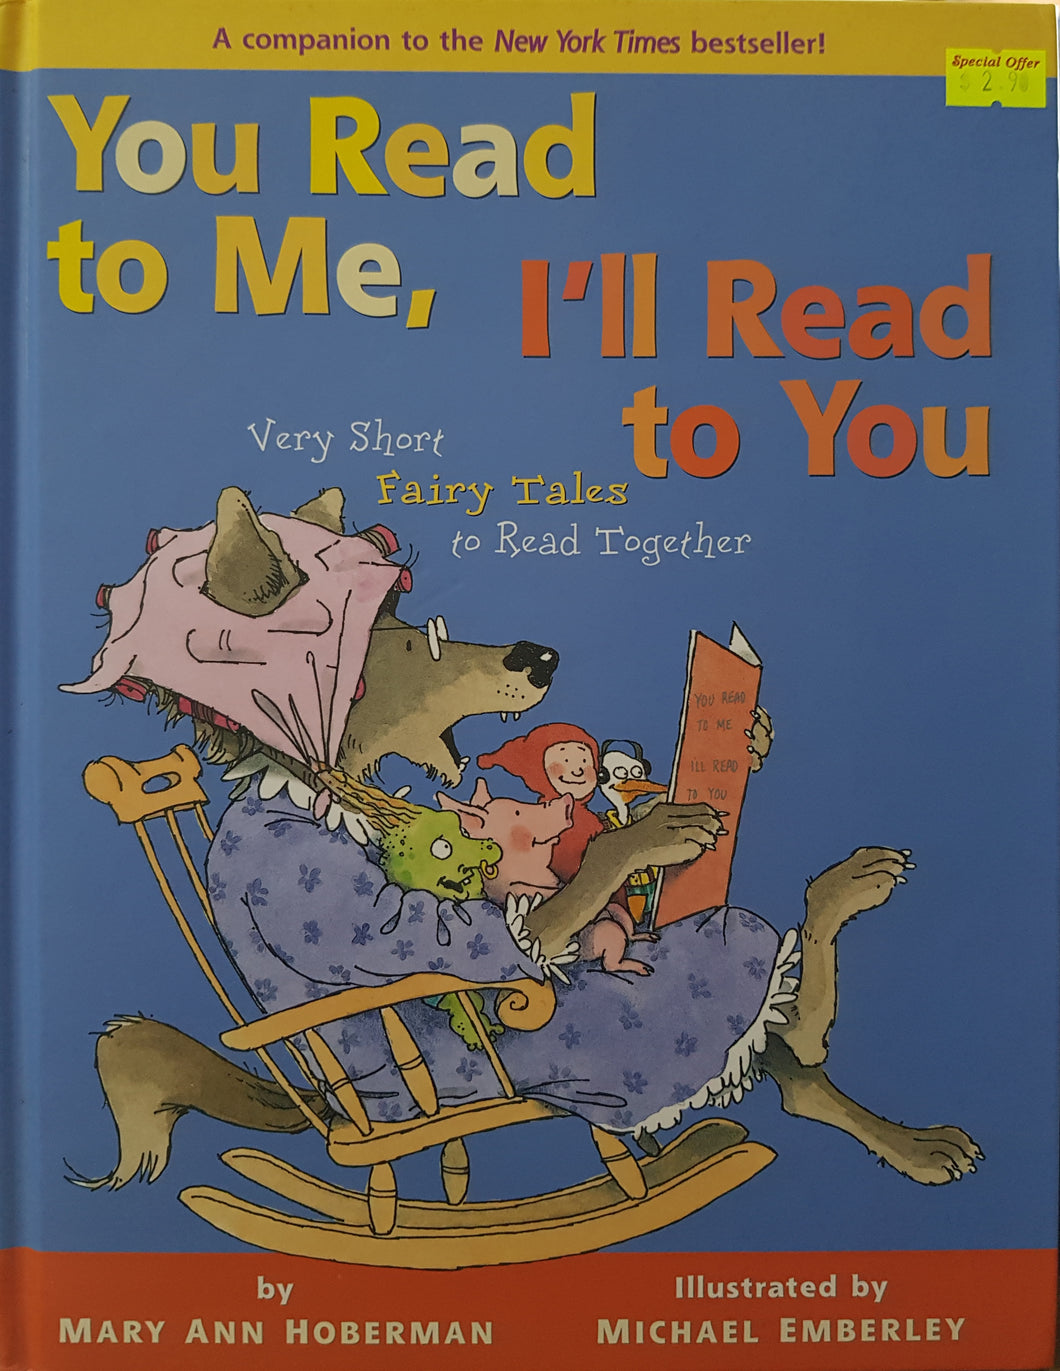 You Read to Me, I'll Read to You - Mary Ann Hoberman & Michael Emberley